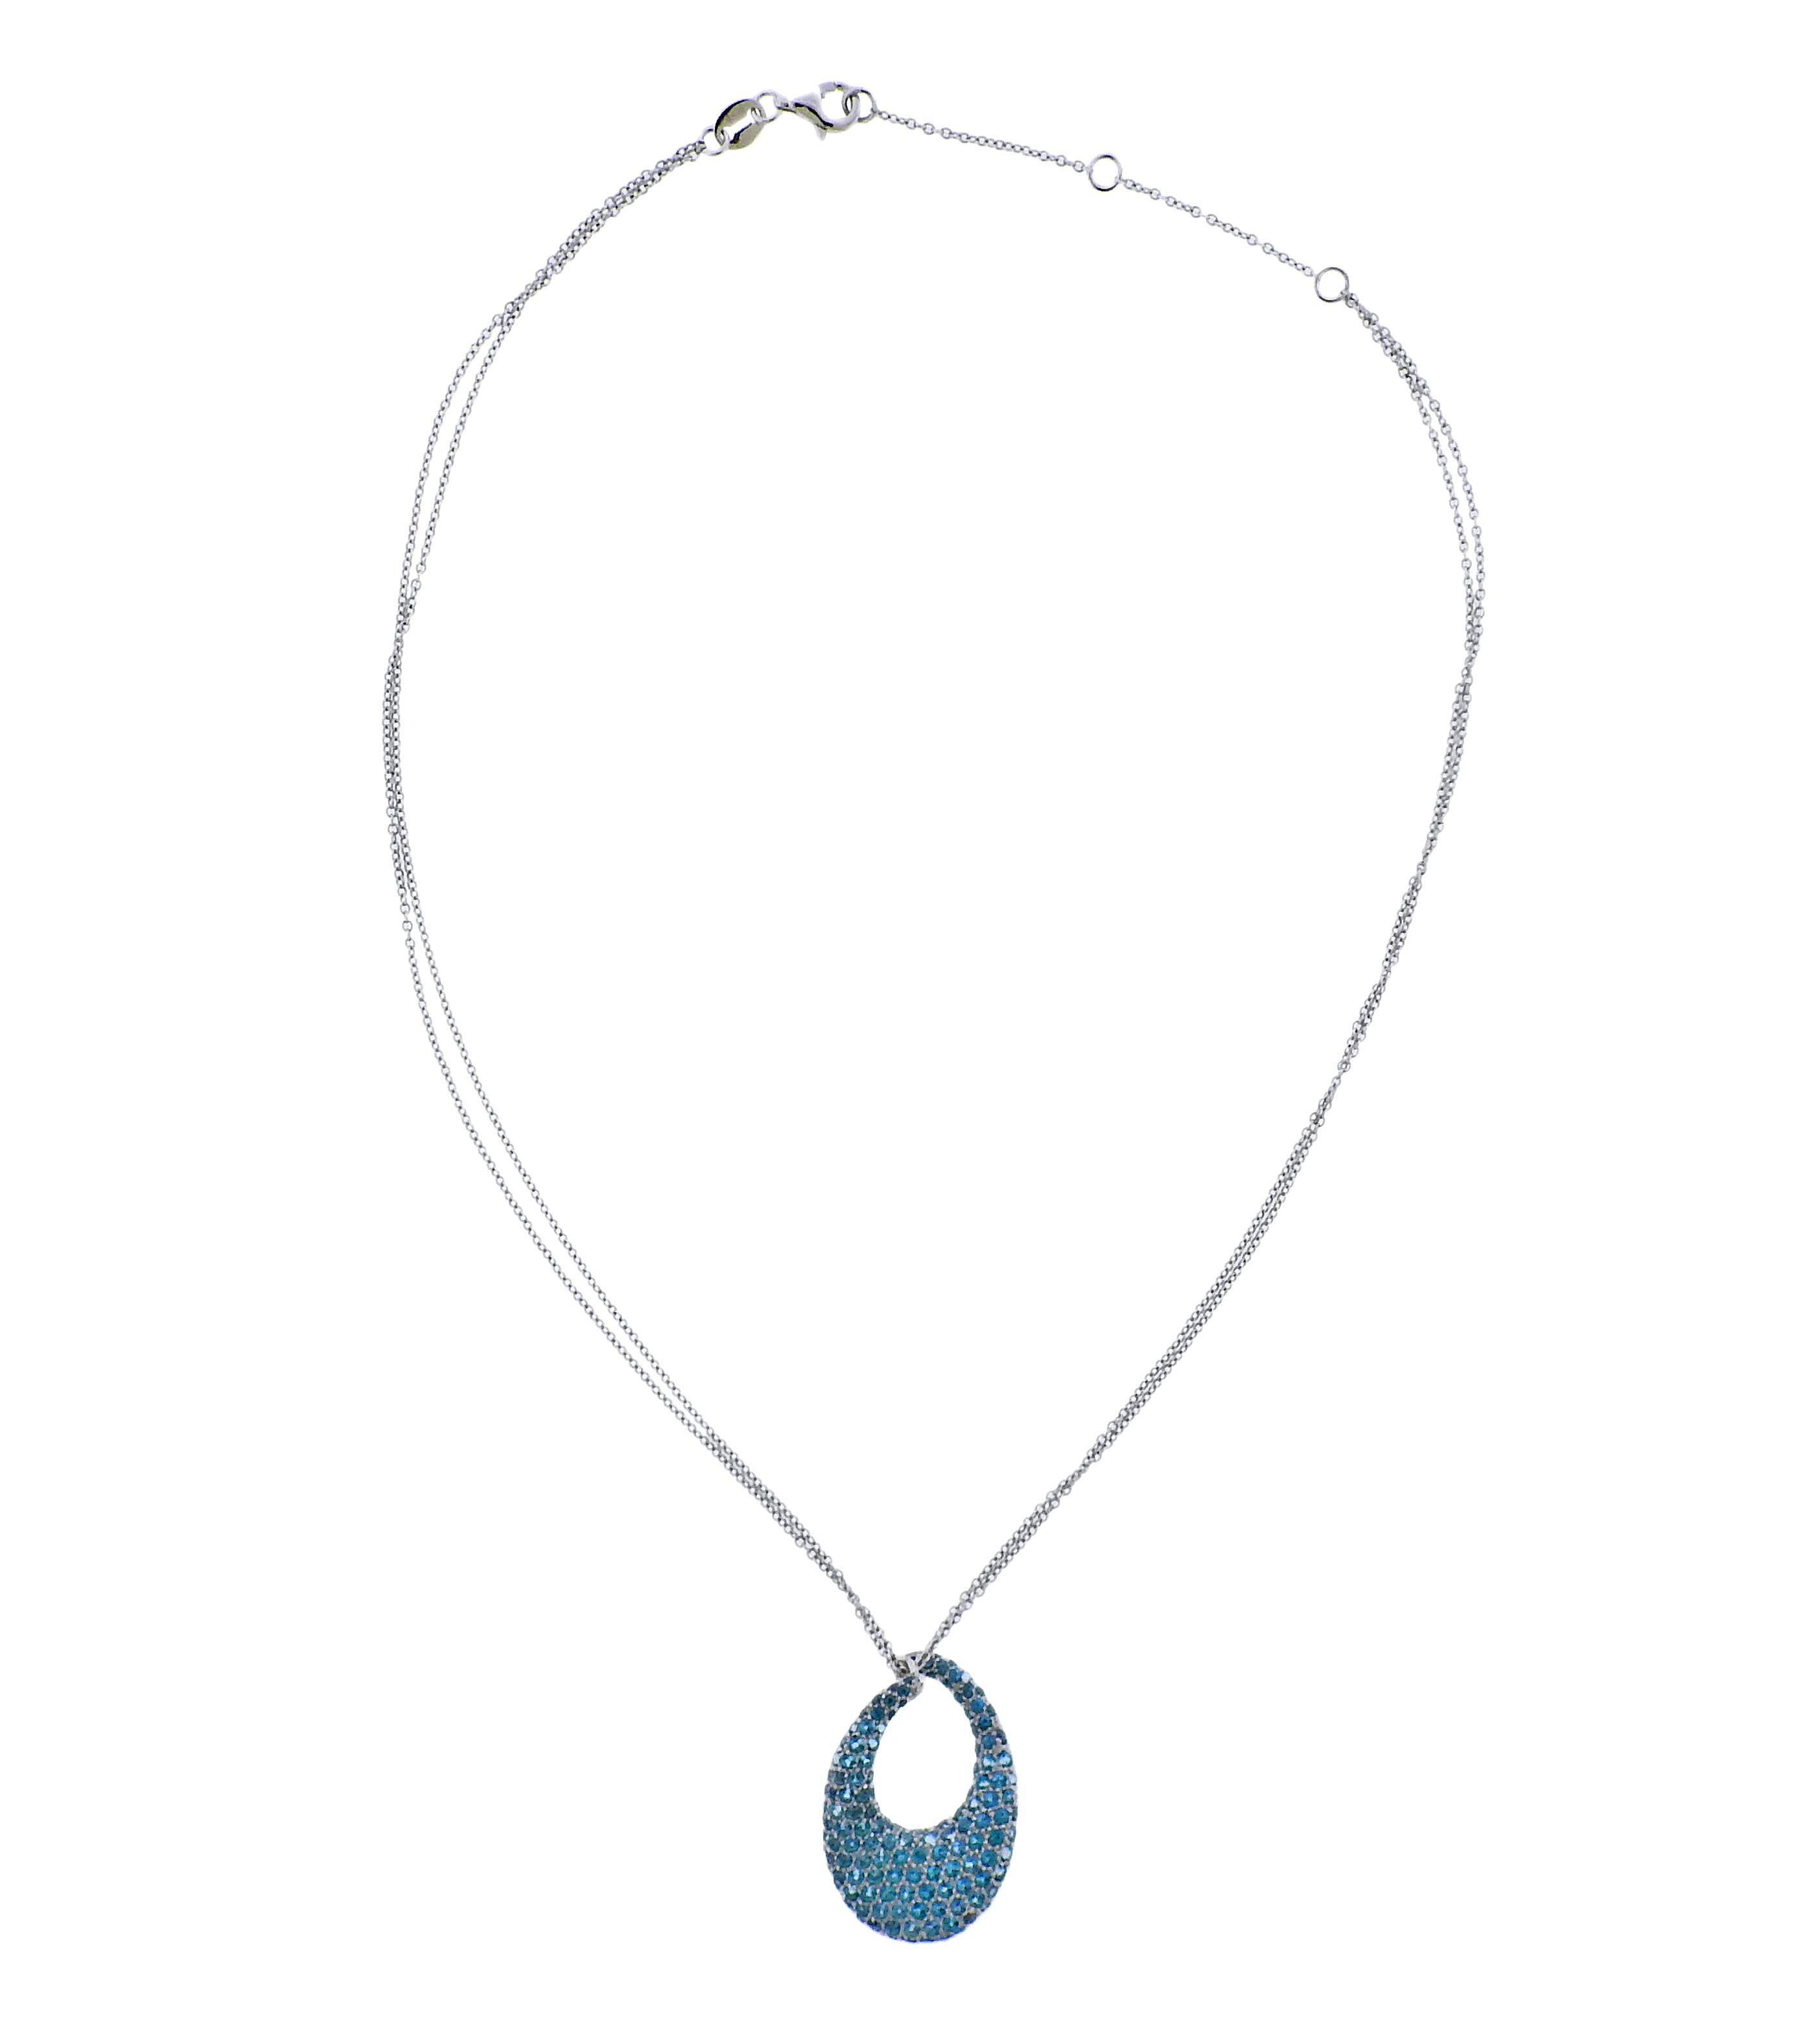 Brand new with tag Bucherer pendant necklace, with 3.33ctw blue topaz. Retail $3190. Comes with box.  Necklace is 17